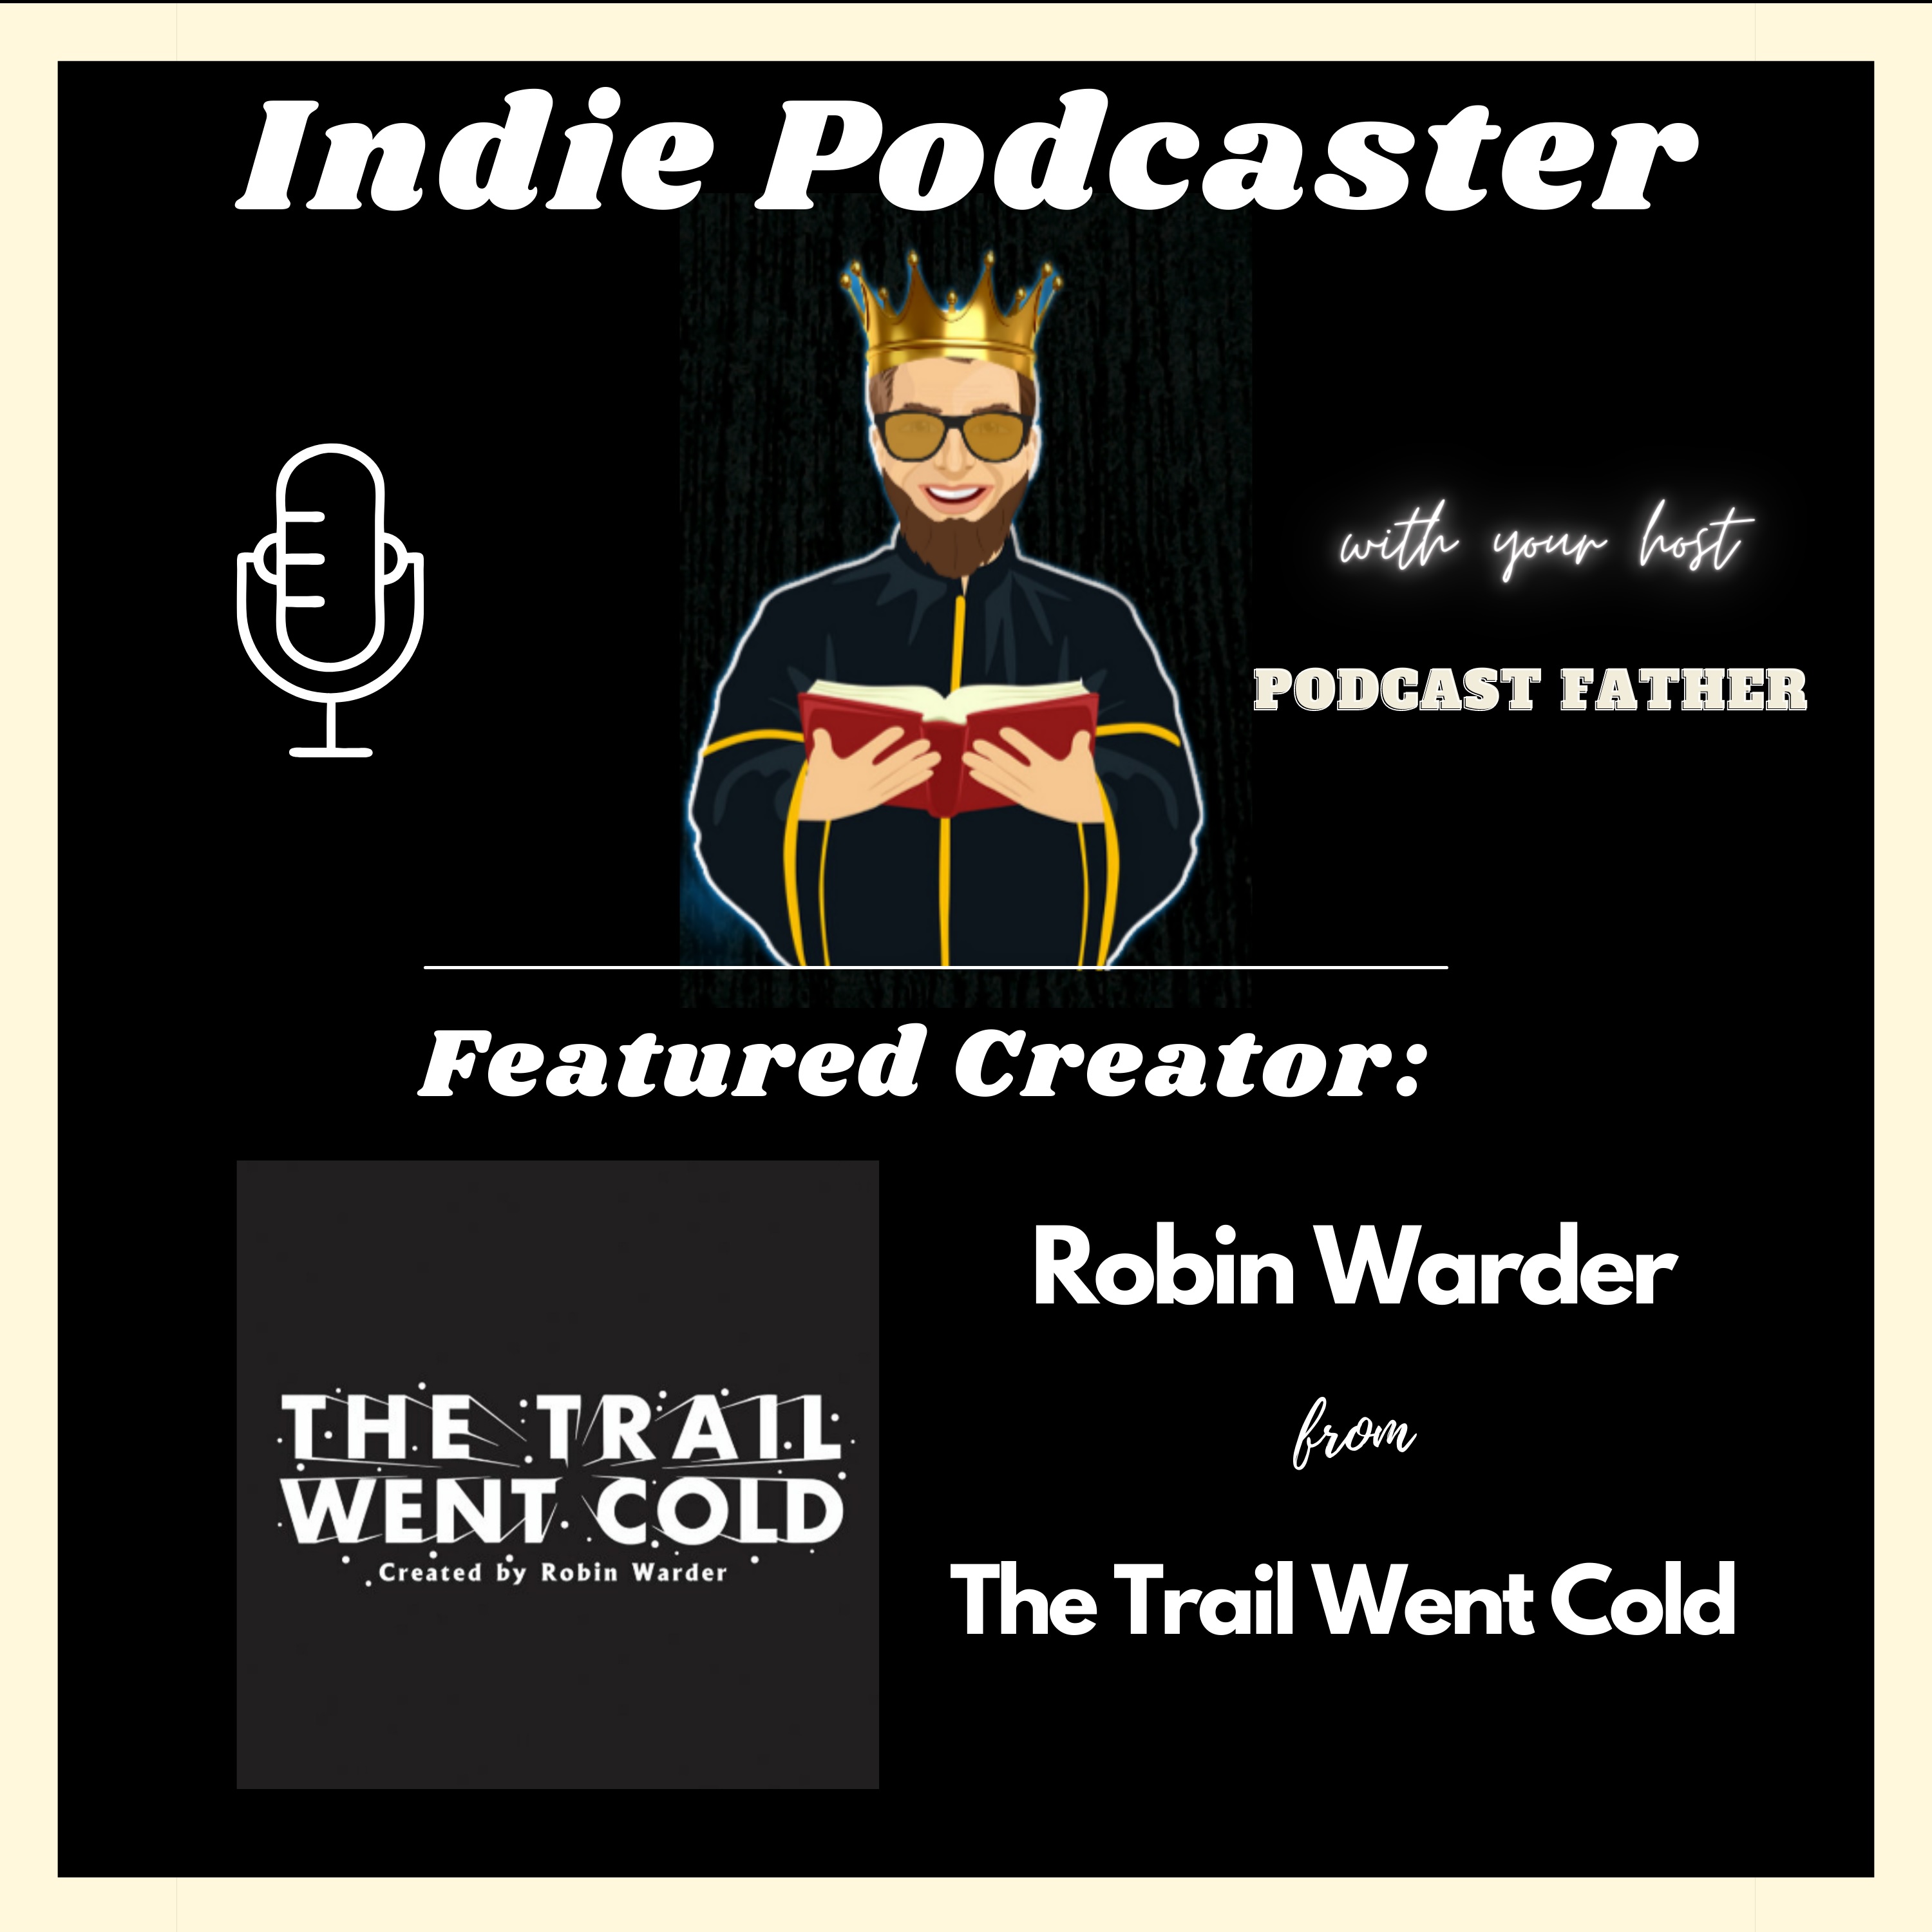 Robin Warder from The Trail Went Cold Image